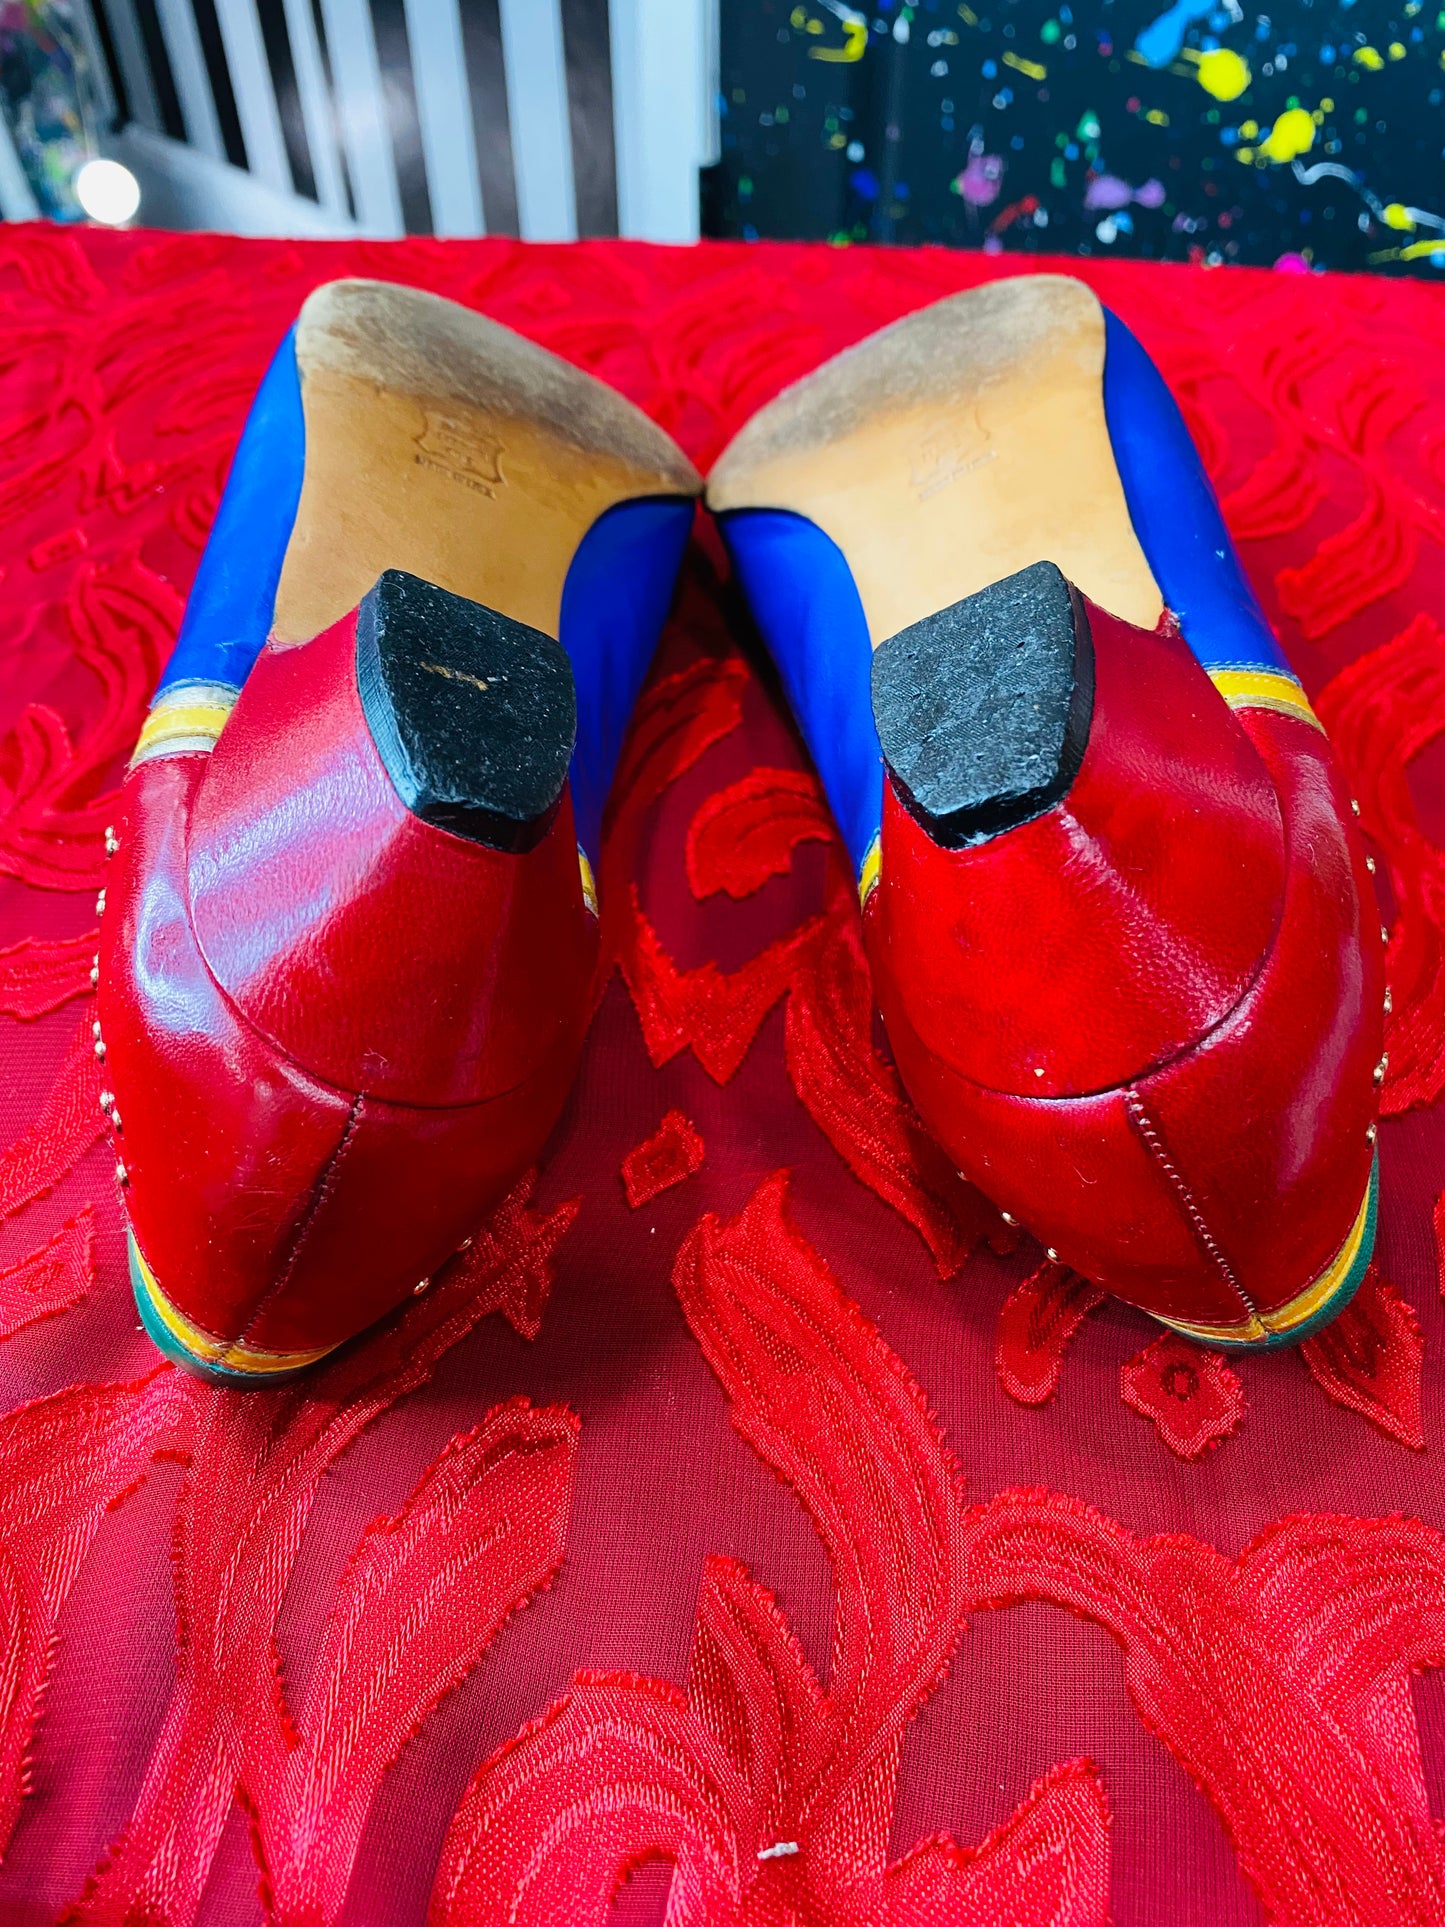 Lady Gourt Leather Shoes